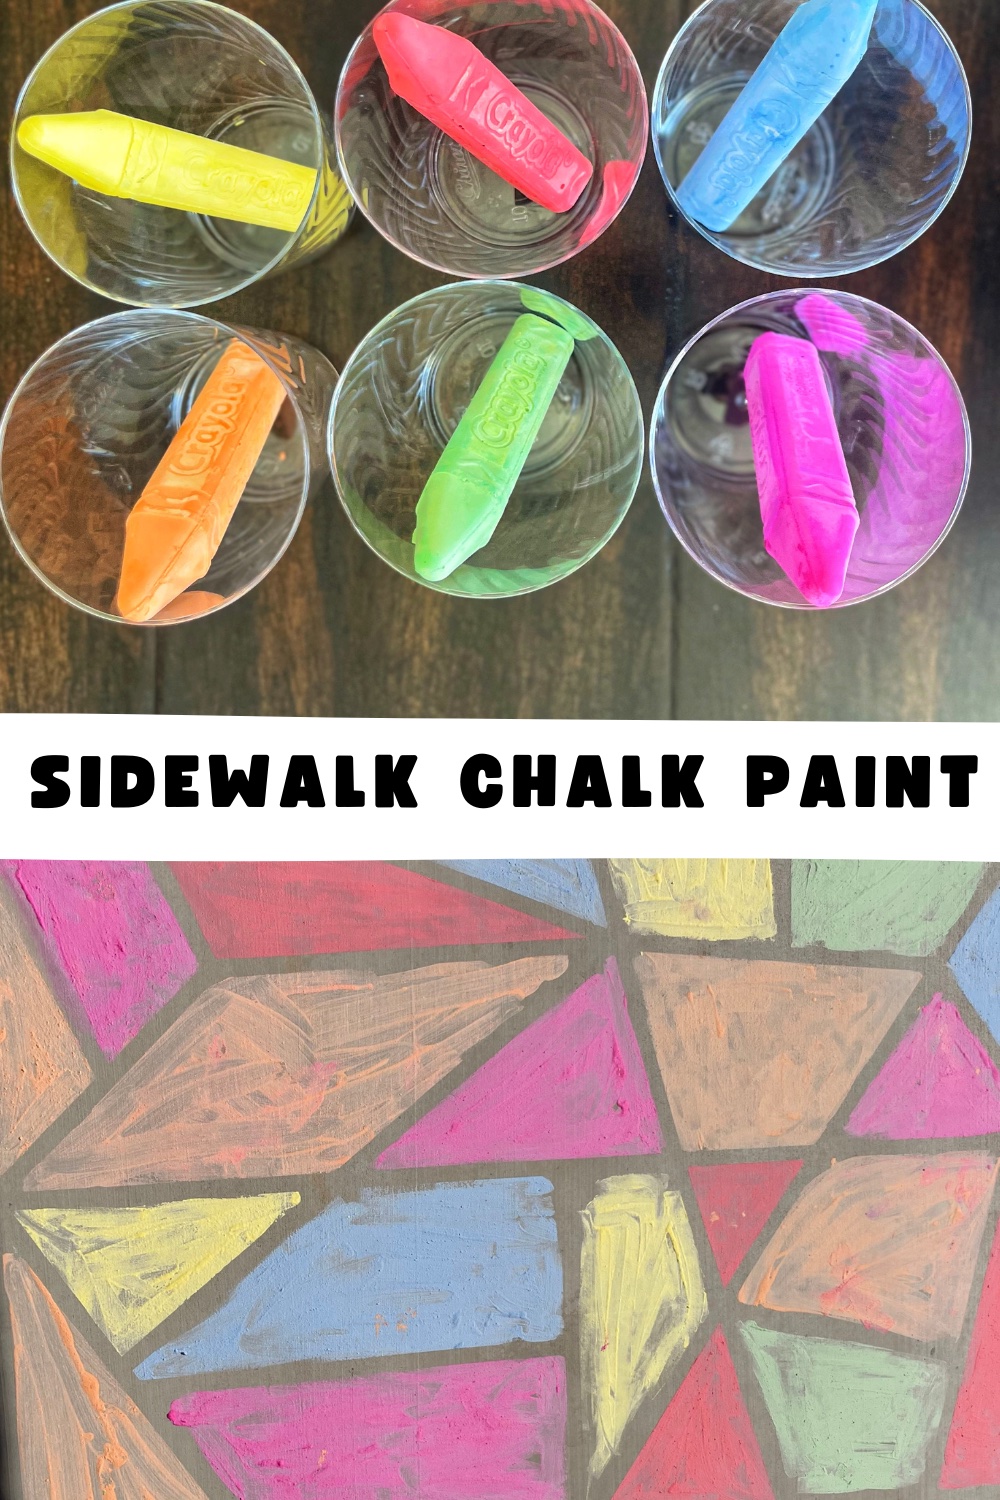 I love quick, cheap, EASY activities I can whip out with ingredients I already have. This DIY sidewalk chalk paint was perfect! So simple to make, and the kids loved it! 